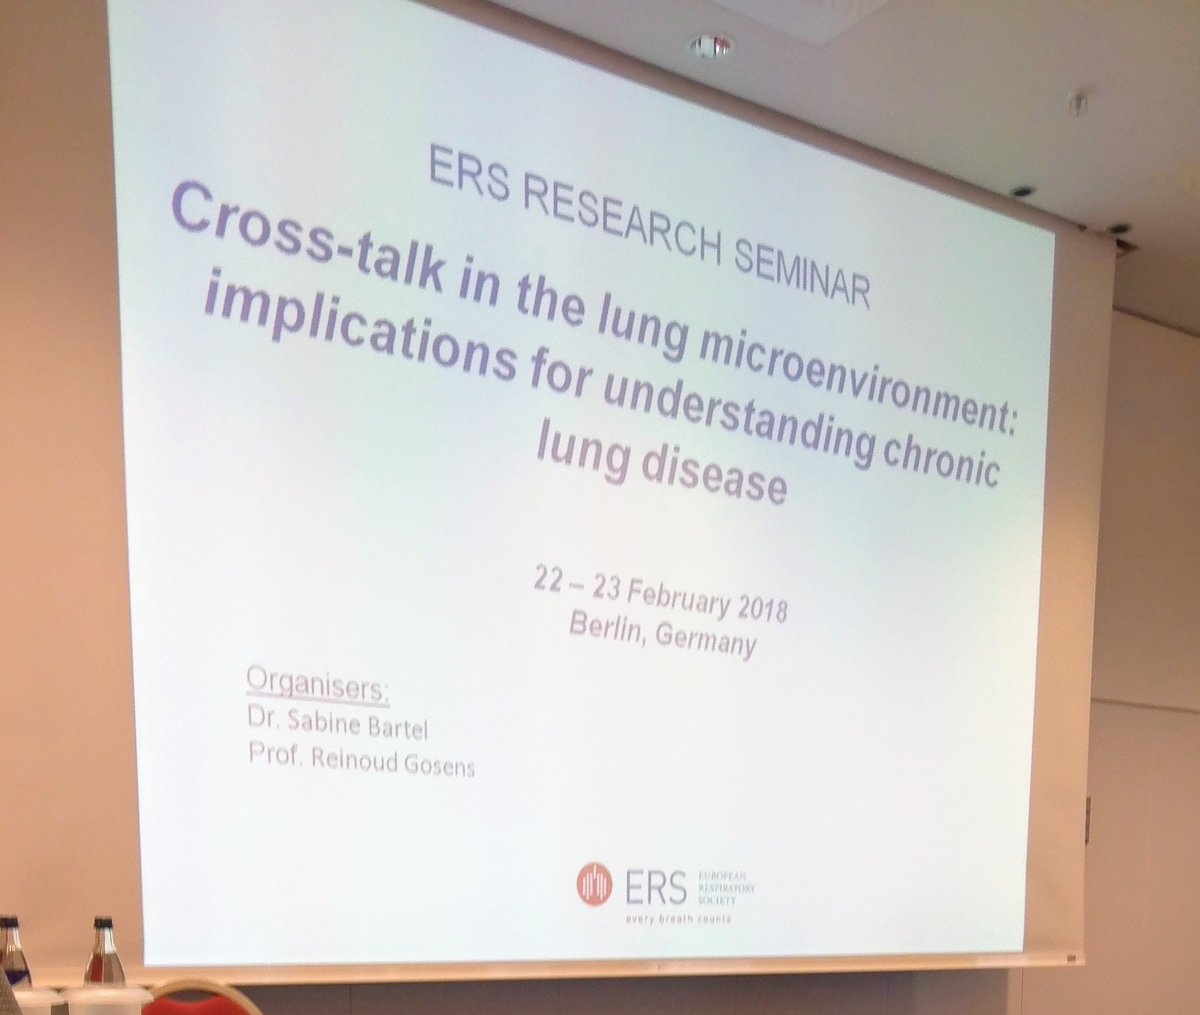 2 days of great science and stimulating discussions on cross-talk in the lung microenvironment unfortunately coming to an end #everythingaffectseverything #anddependsonthecontext #ERSresearchseminar @ERSTalk @EarlyCareerERS